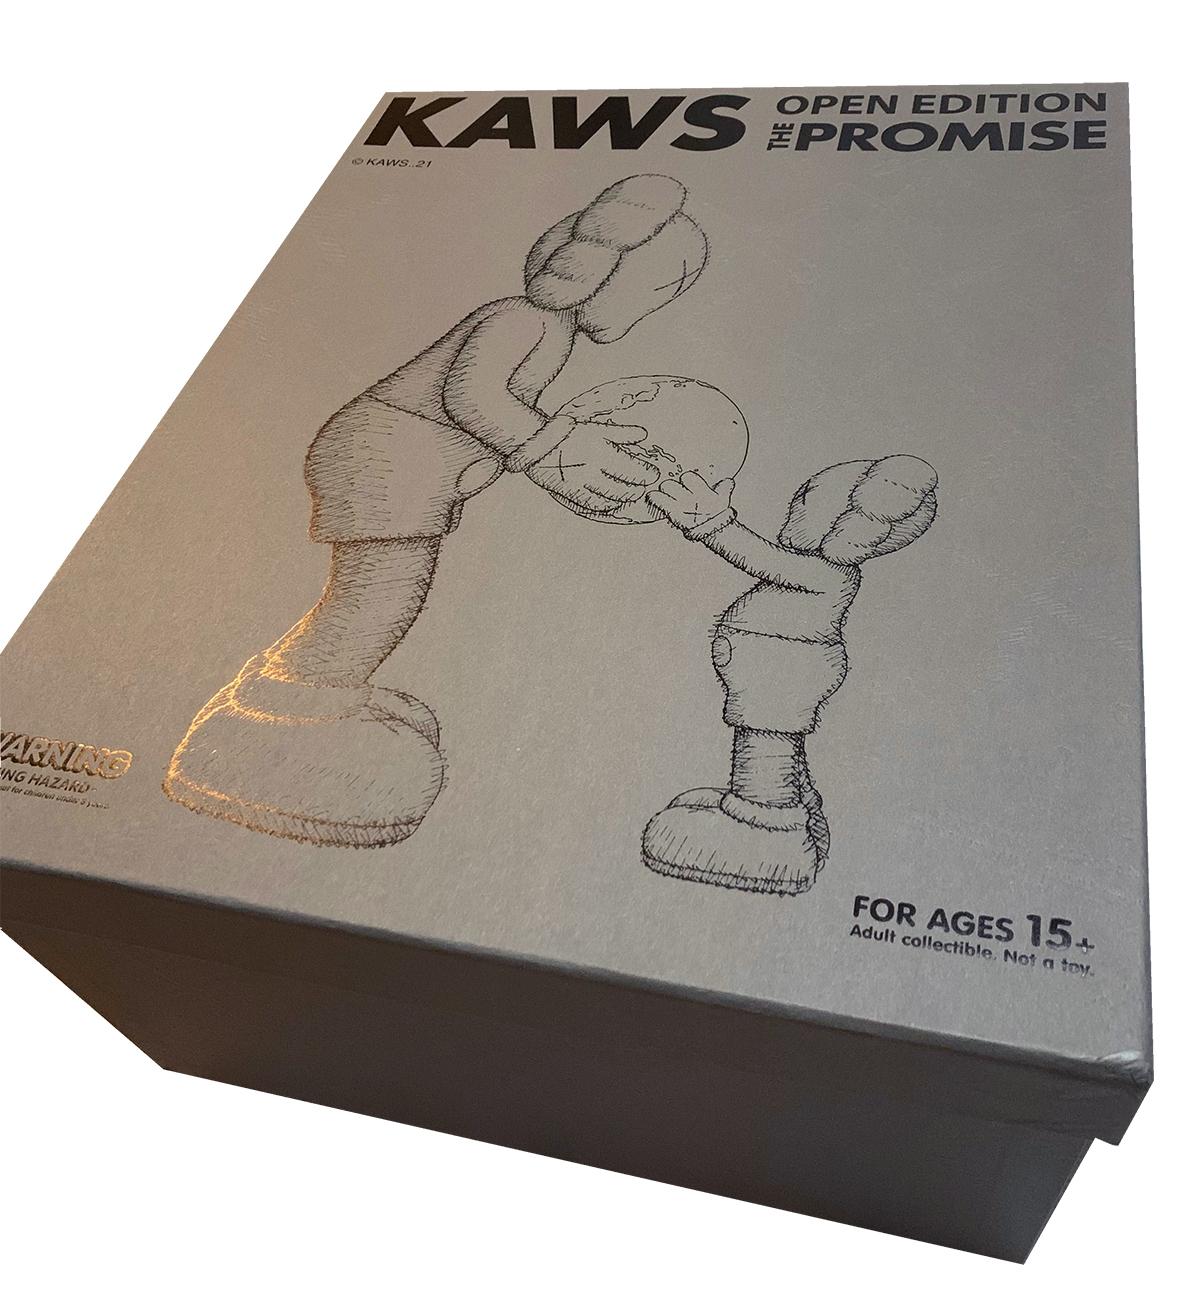 KAWS The Promise (brown): A unique KAWS Companion featuring a blue & green globe being affectionately shared between parent & child. This timeless, highly collectible KAWS art toy was published on the occasion of: The Promise art installation at